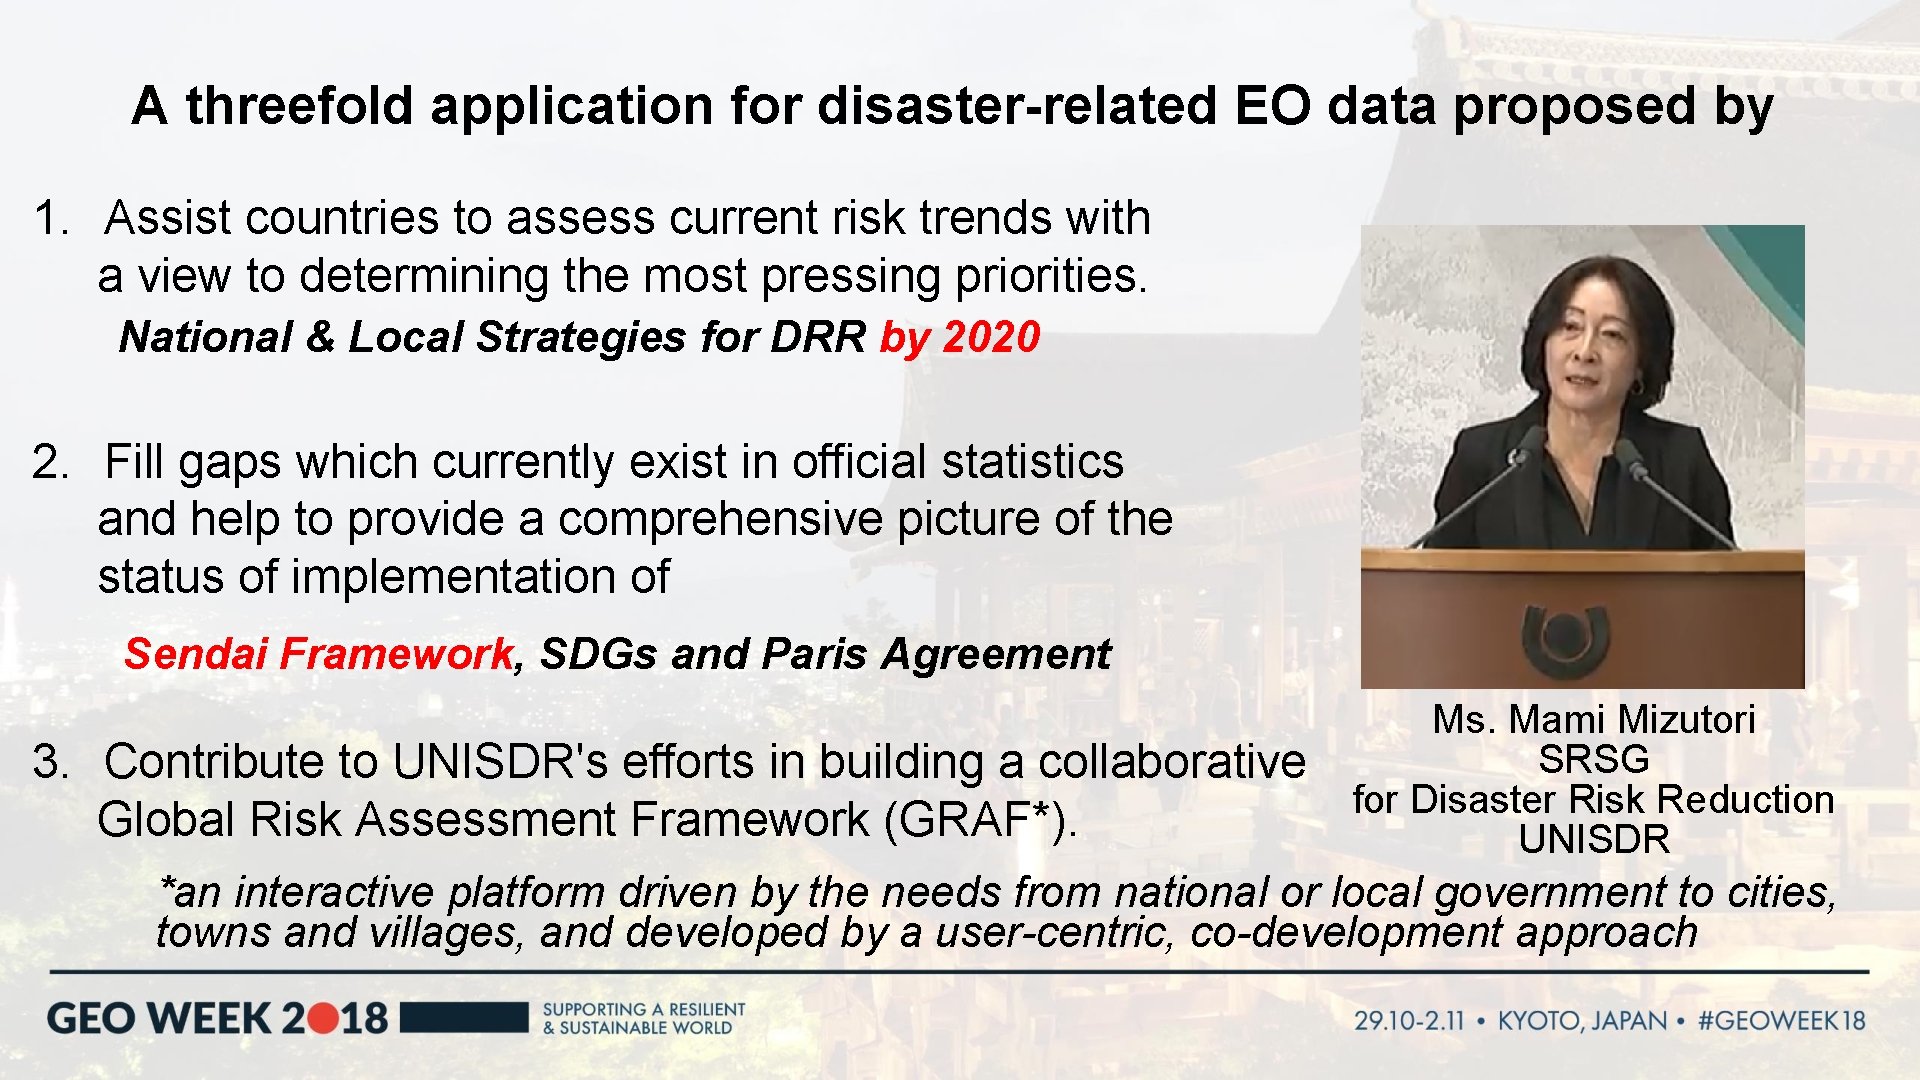 A threefold application for disaster-related EO data proposed by 1. Assist countries to assess